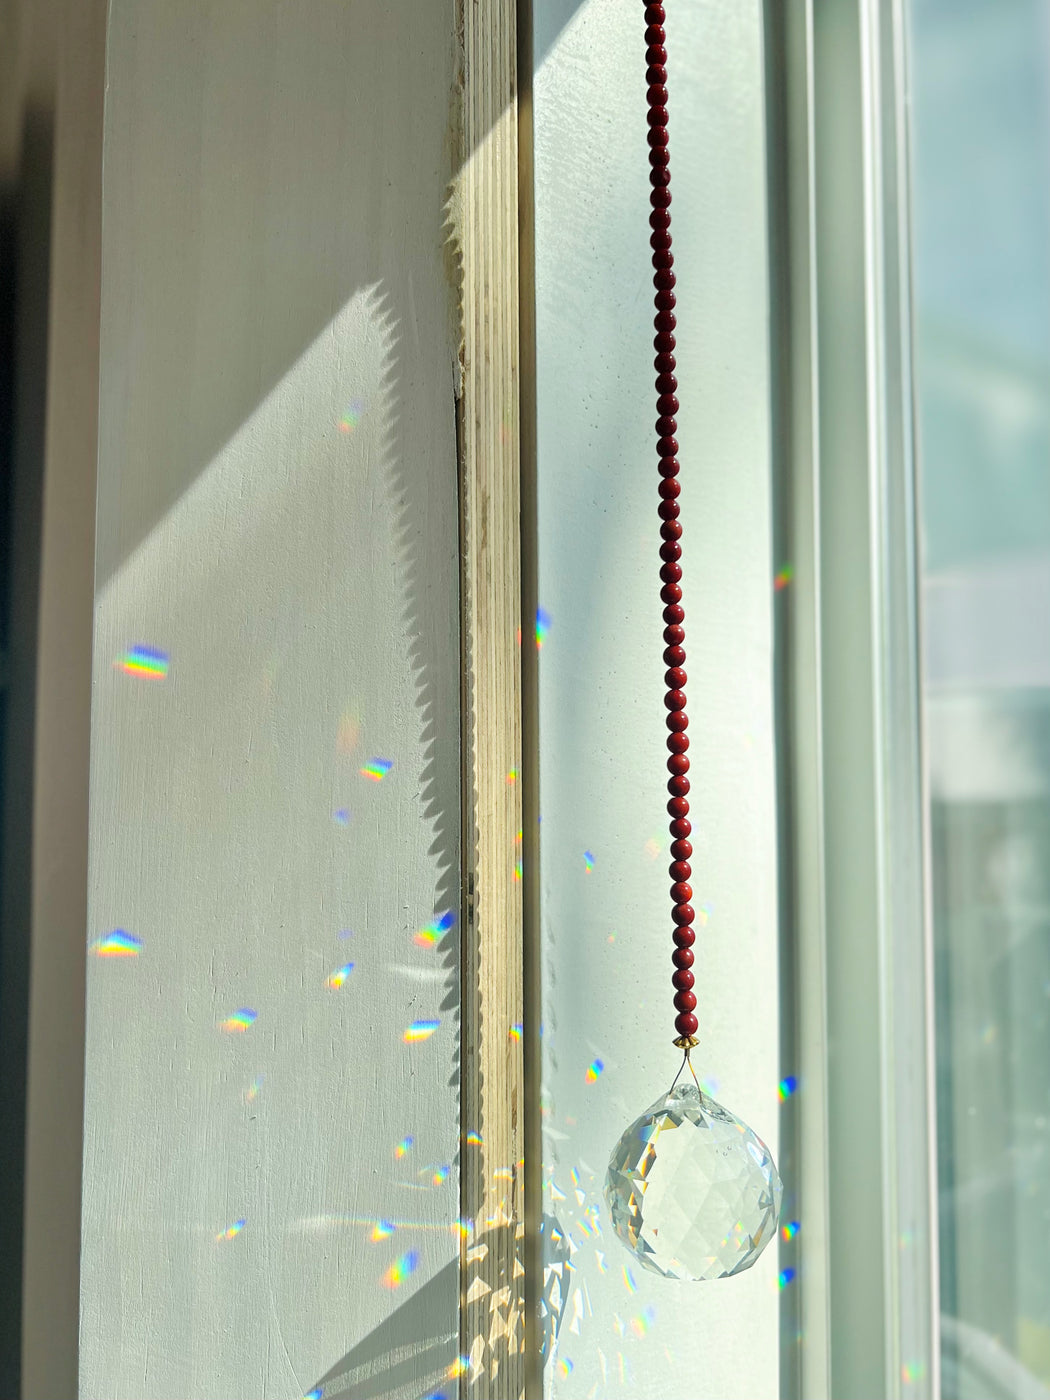 Embellish your space with coral window prism - hang in a sunny spot & watch the rainbows dance!  Coral - an amulet from the sea, provides protection over the feminine & our emotional waters. Said to also nourish blood cells.